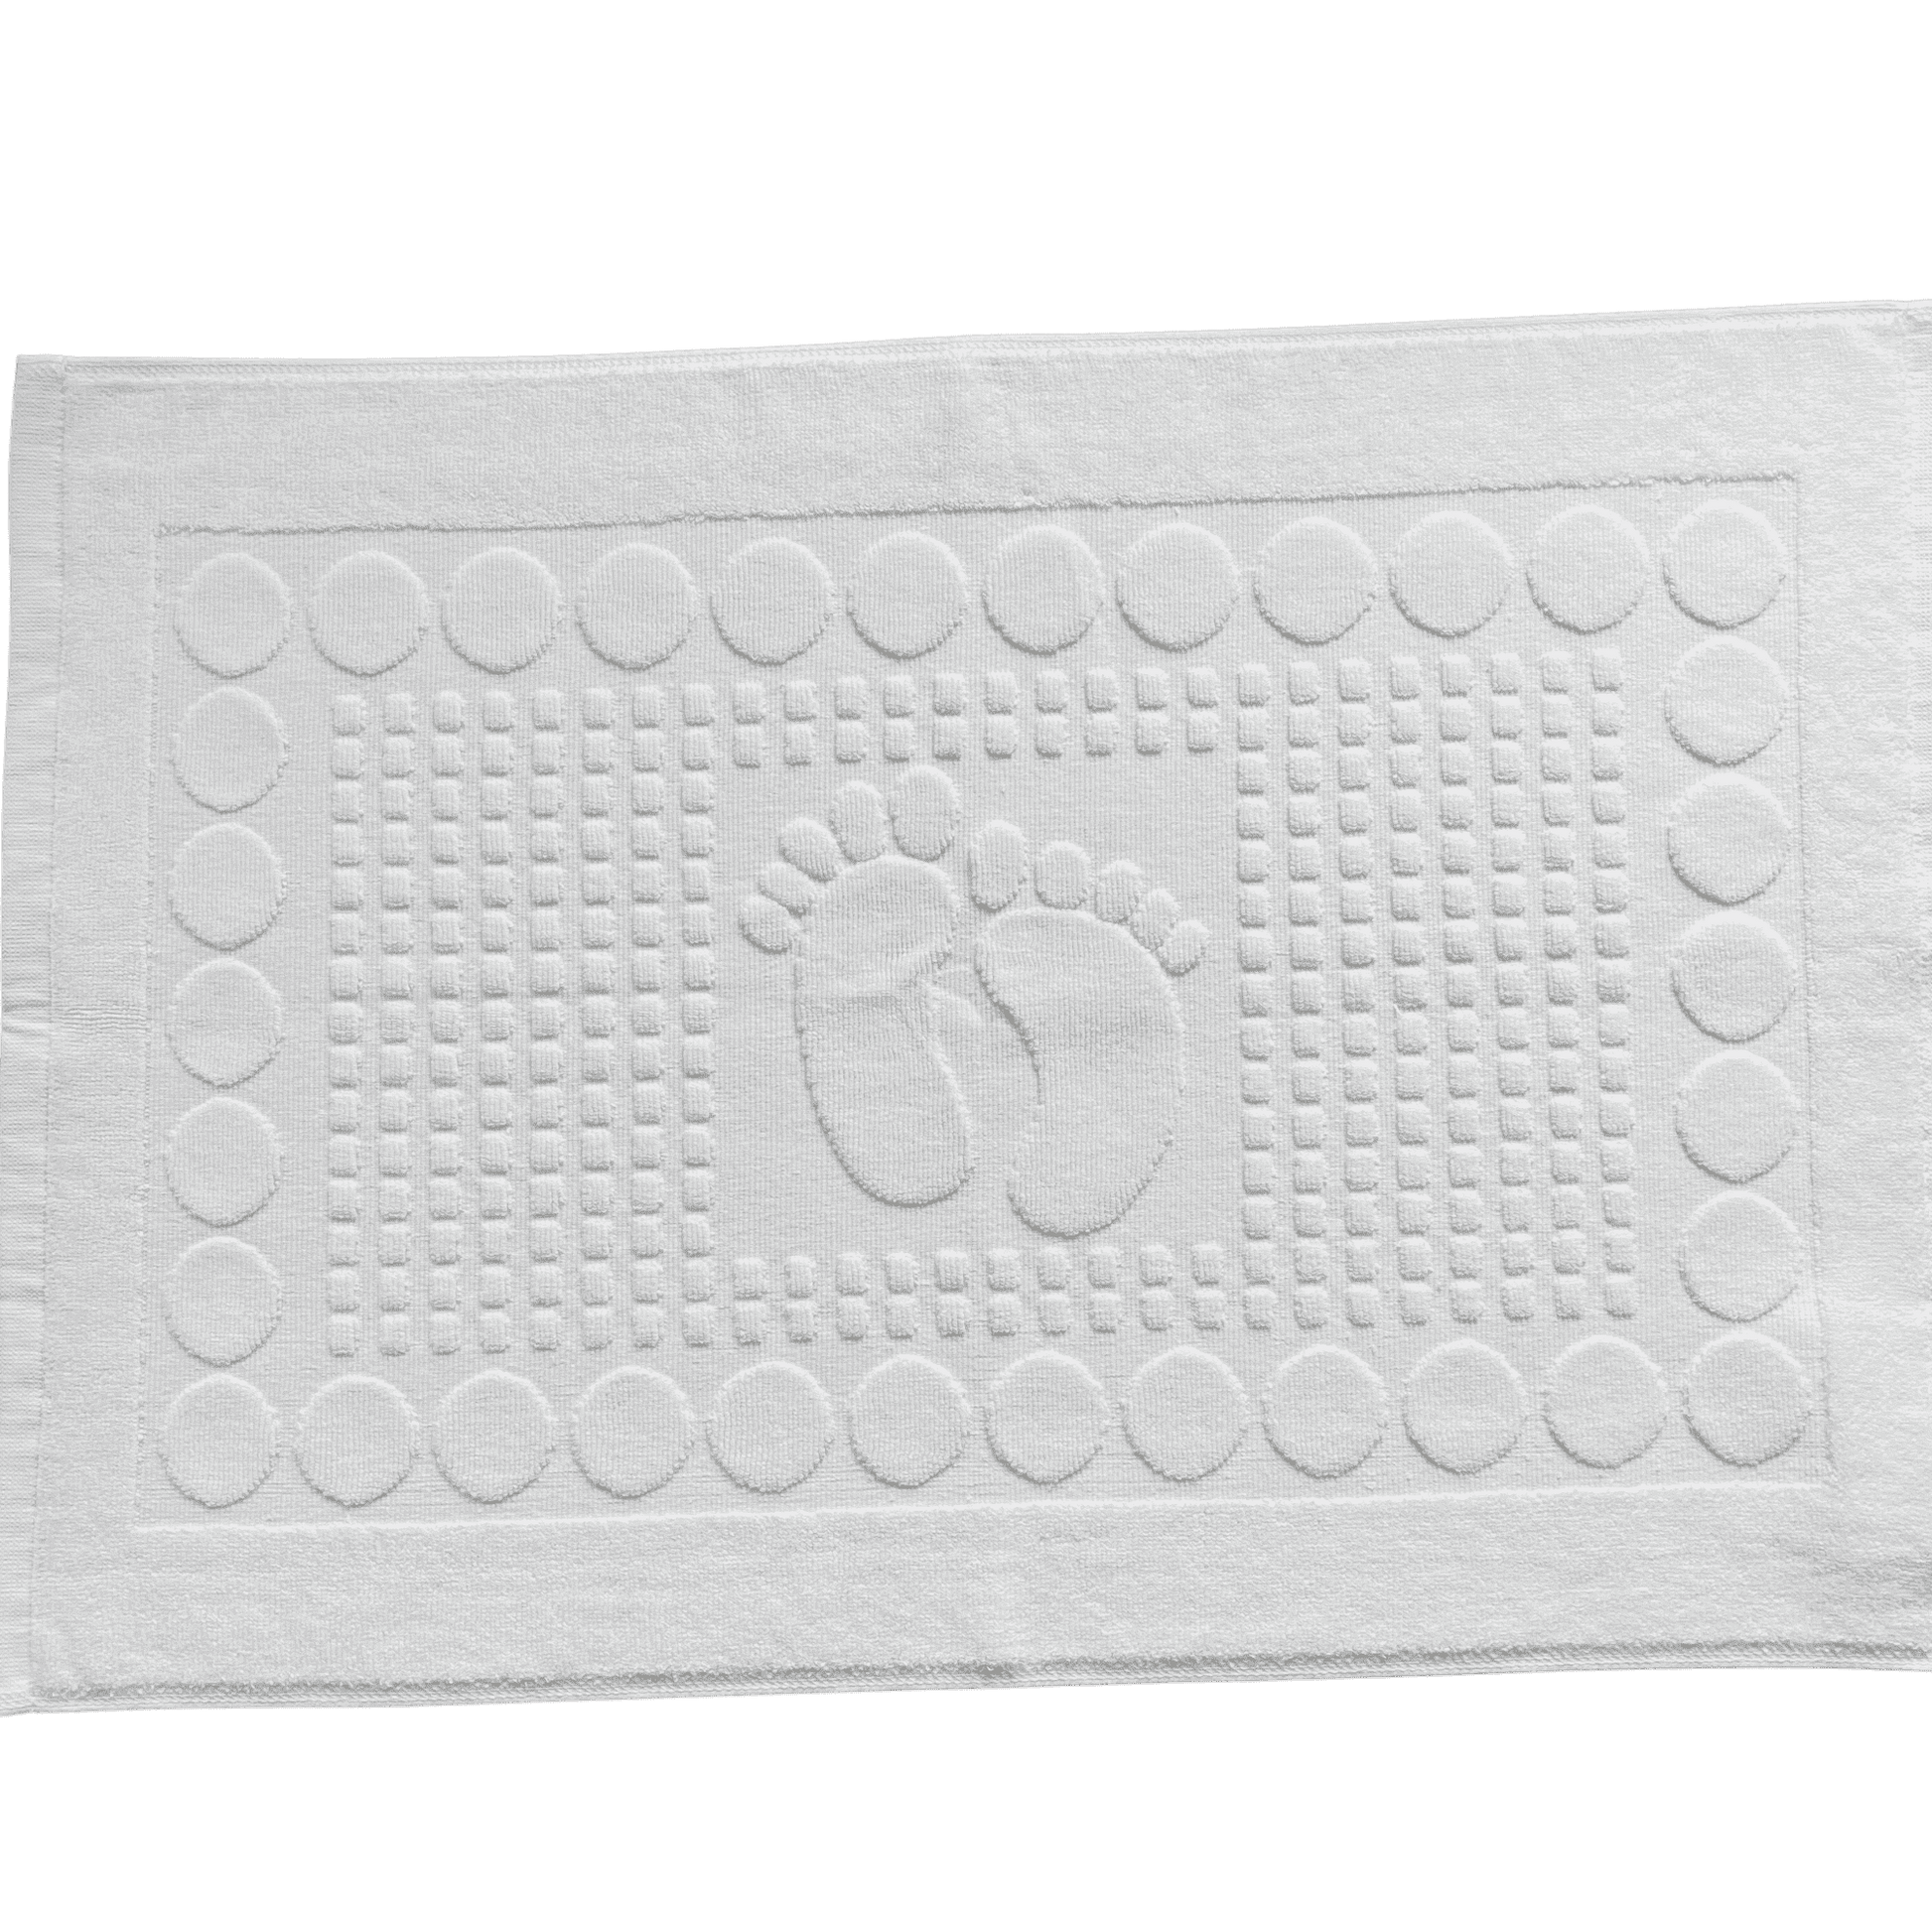 100% Cotton Bathmat  - Delightful Experience Awaits Guests: Little Feet Design Bathmat Adds Charm to Every Bath or Shower - shop now at Canadian Hotel Supplies!